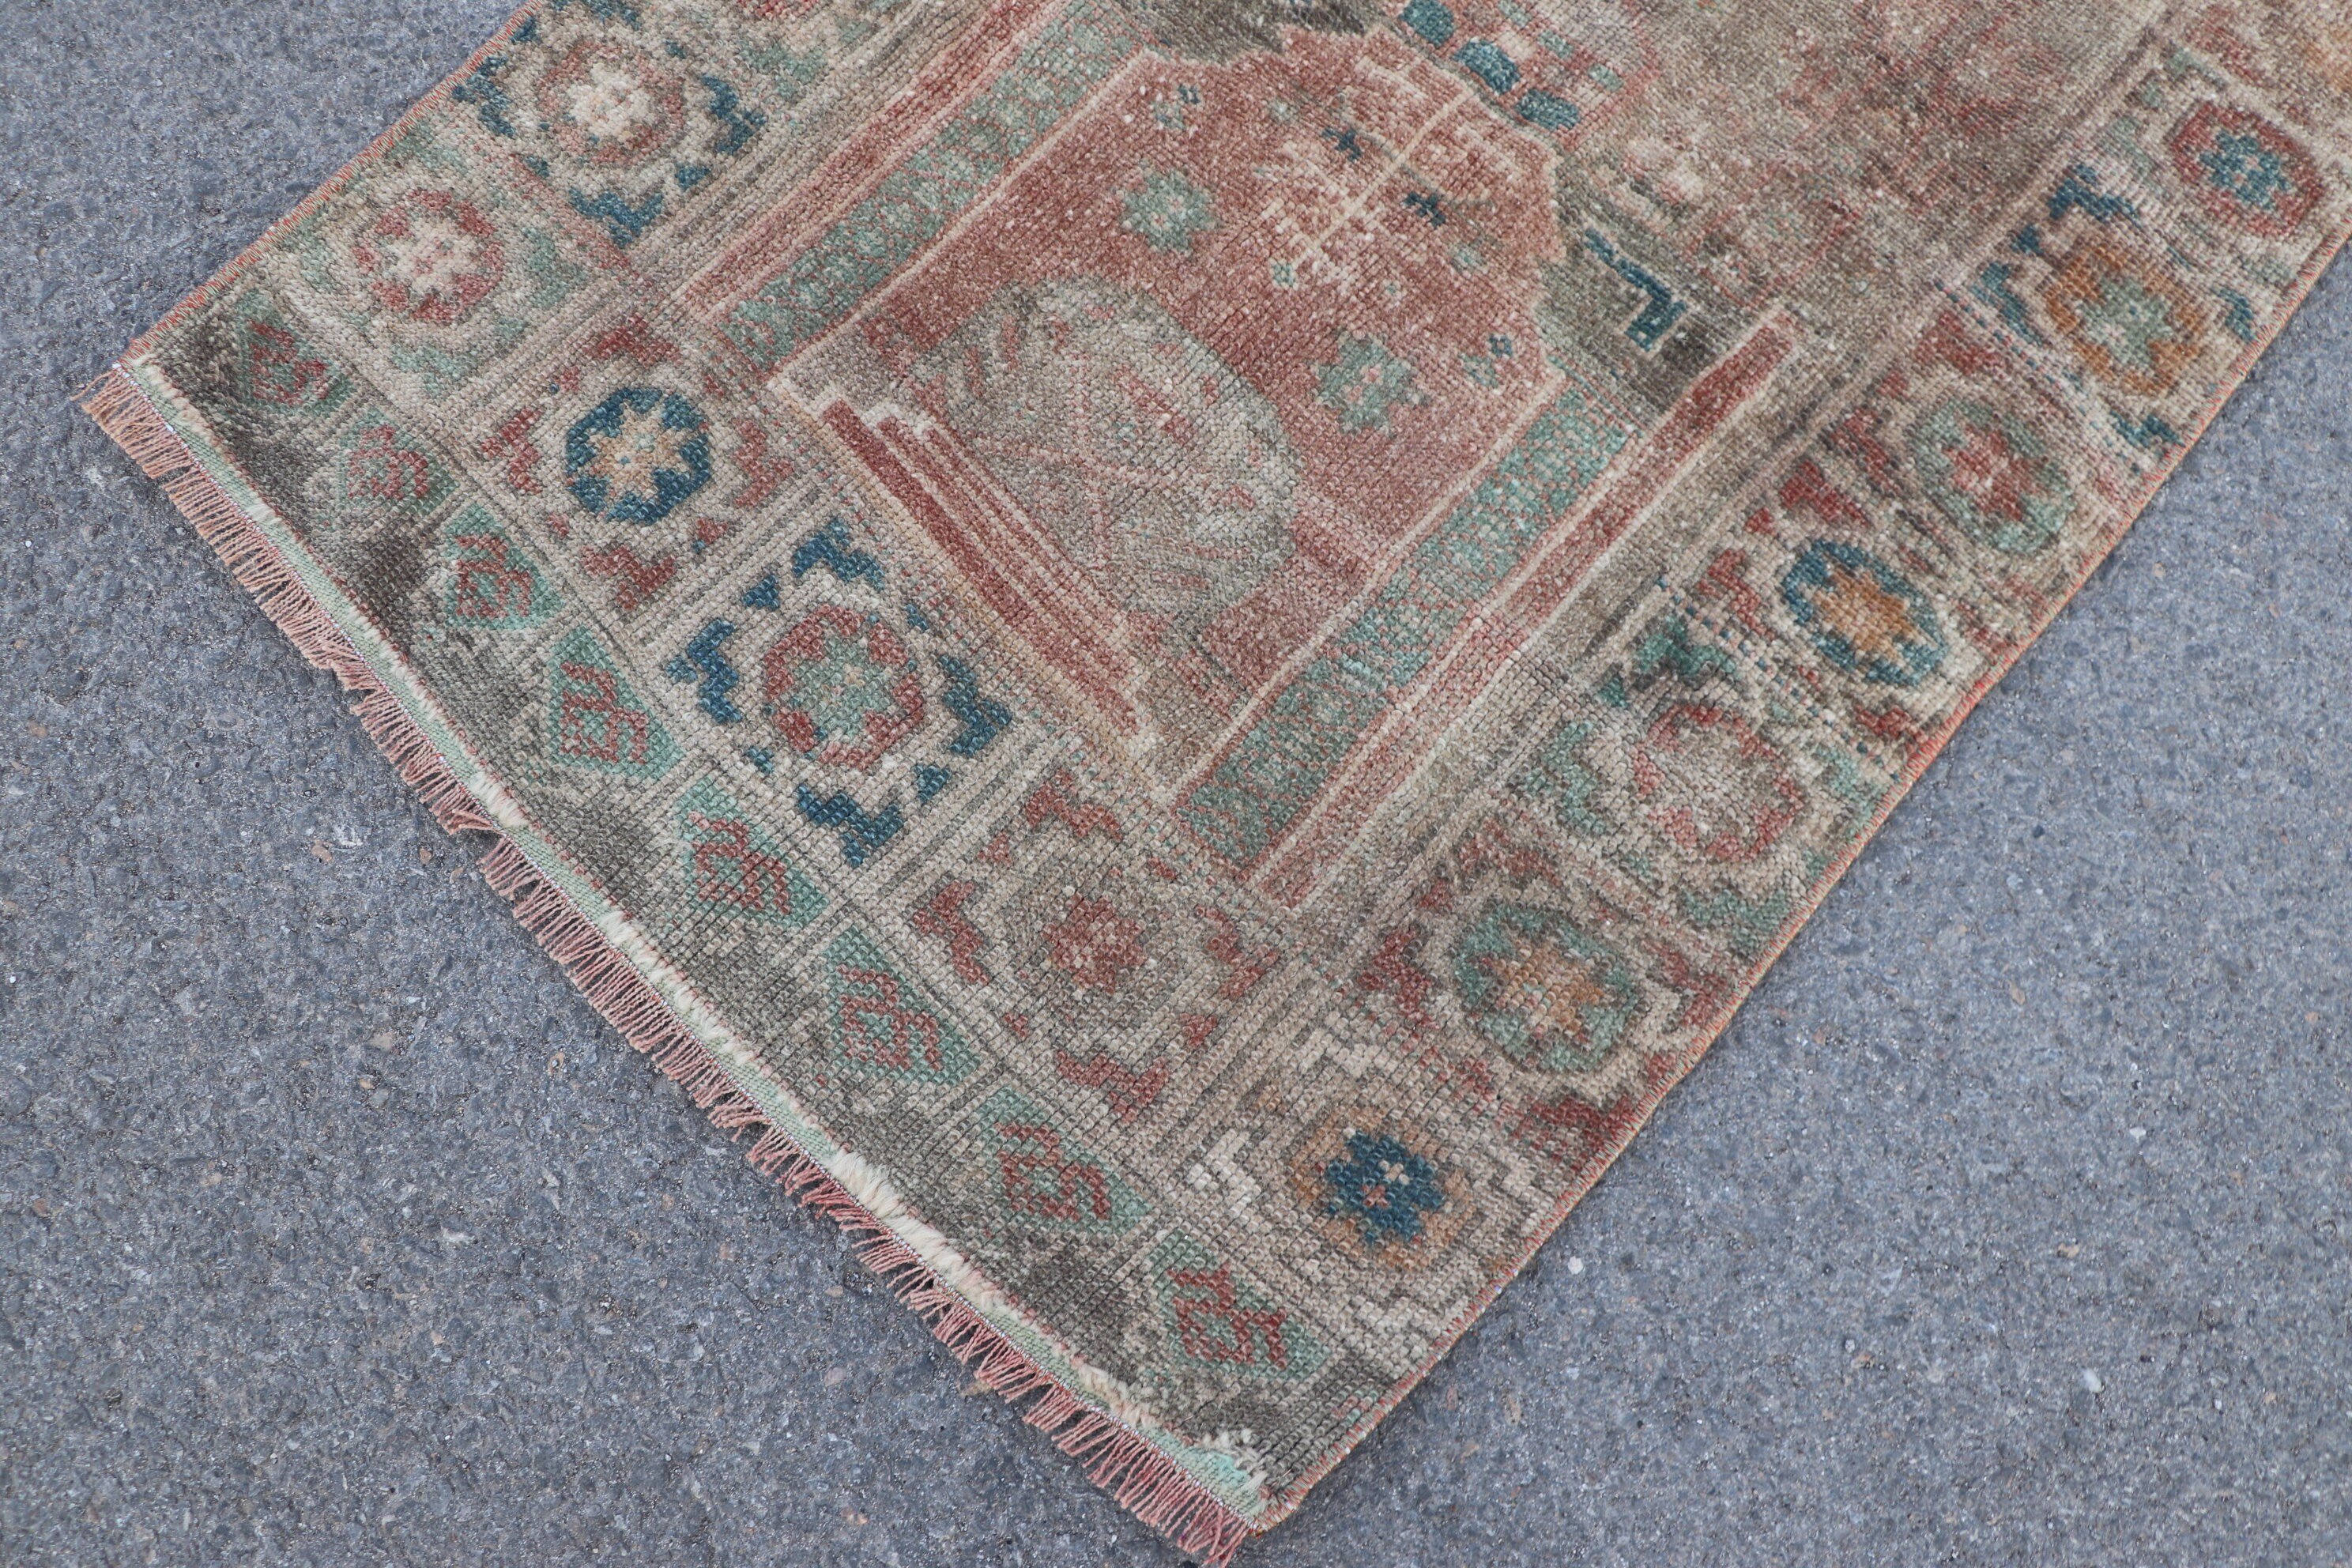 Bath Rug, Rugs for Bath, Turkish Rugs, Red  2.4x3.4 ft Small Rugs, Oriental Rugs, Vintage Rug, Moroccan Rug, Kitchen Rugs